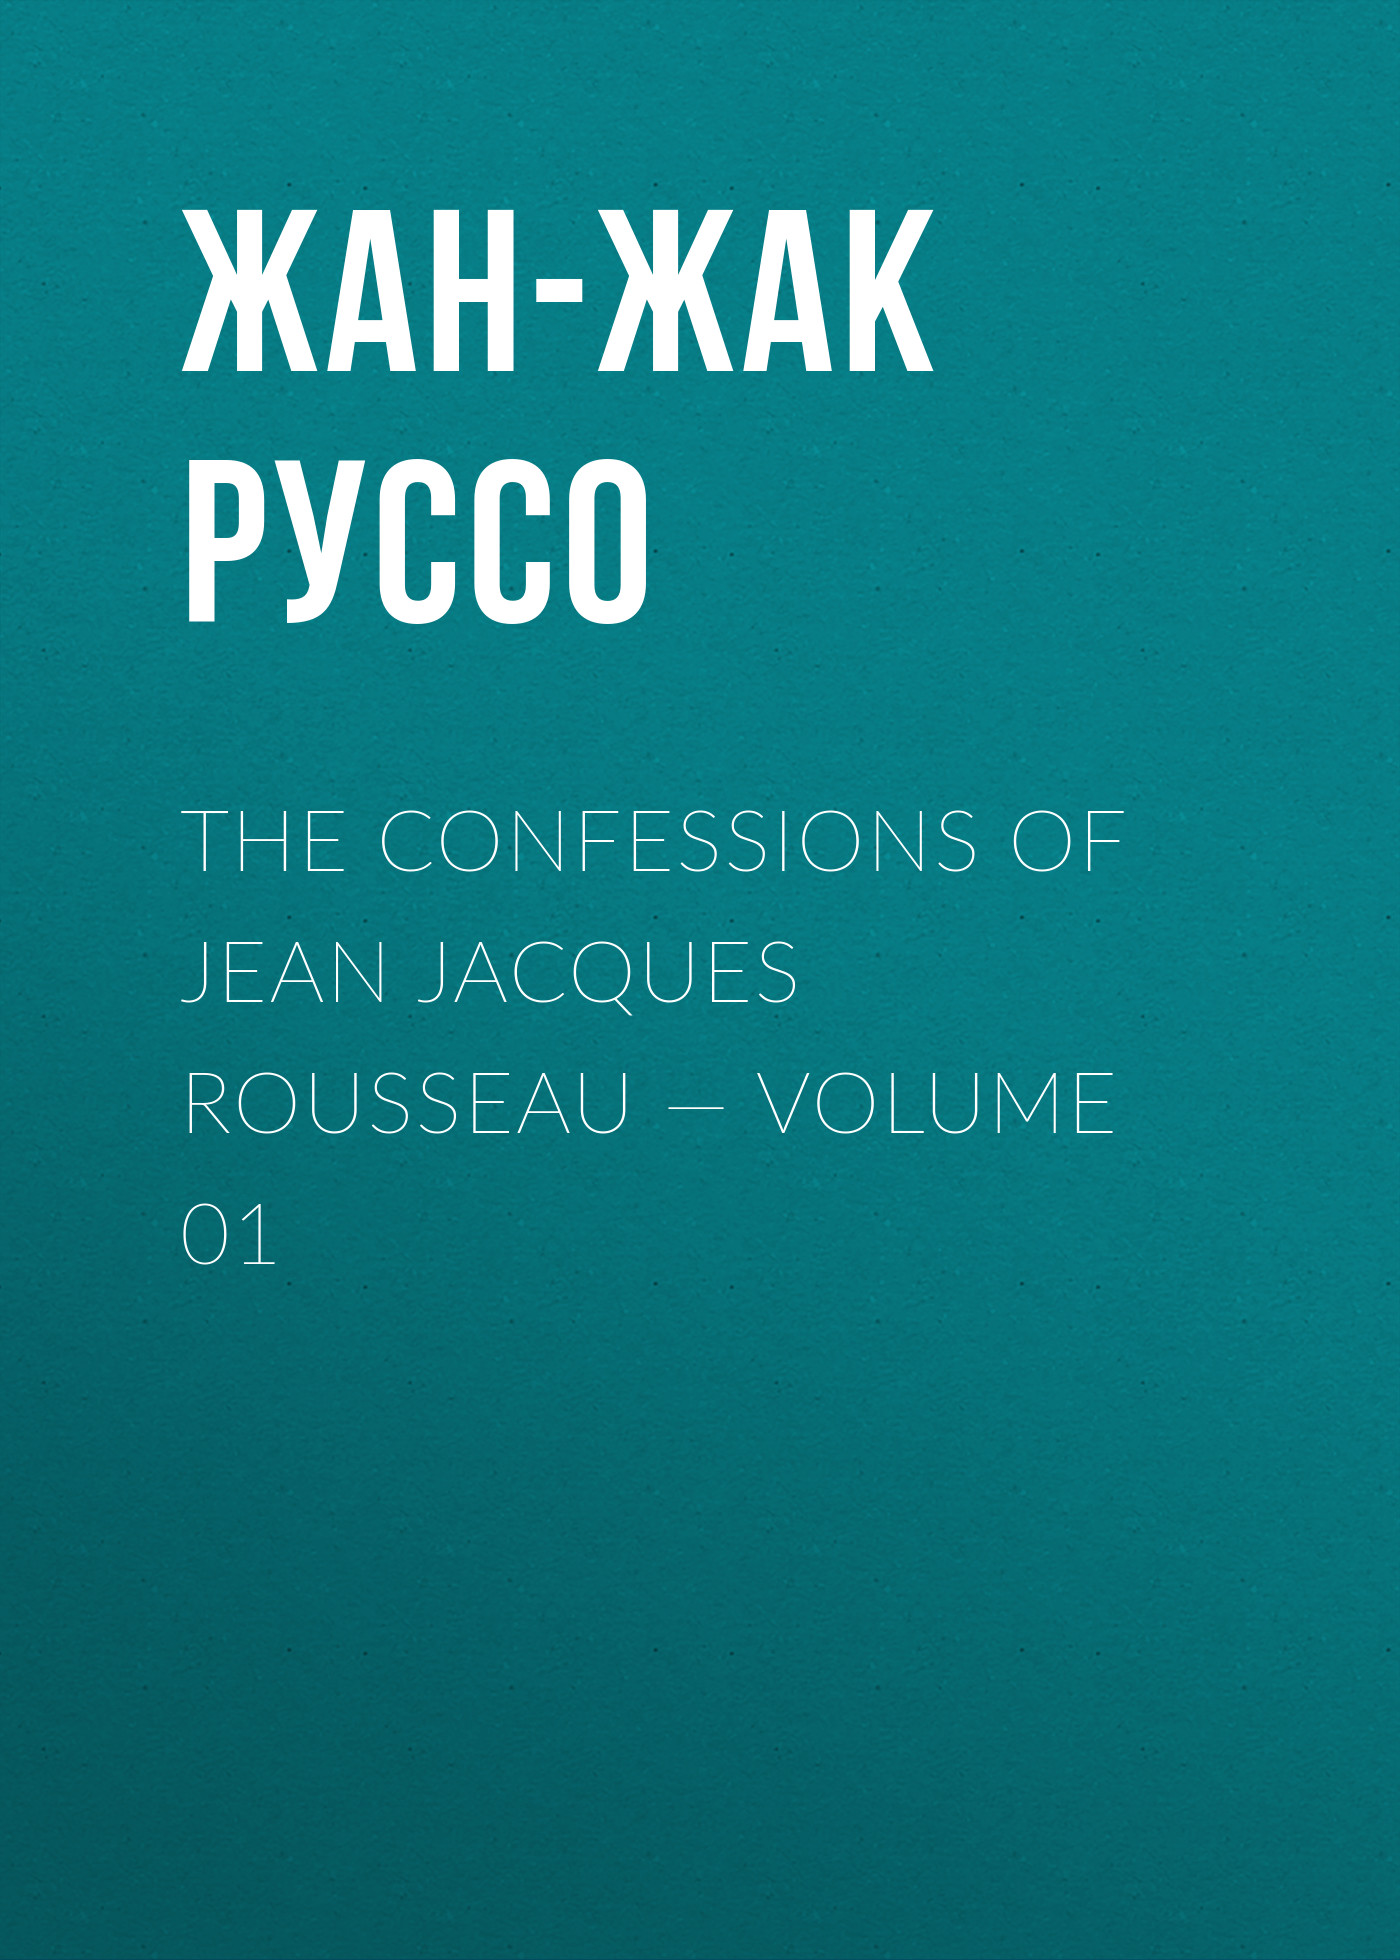 The Confessions of Jean Jacques Rousseau— Volume 01